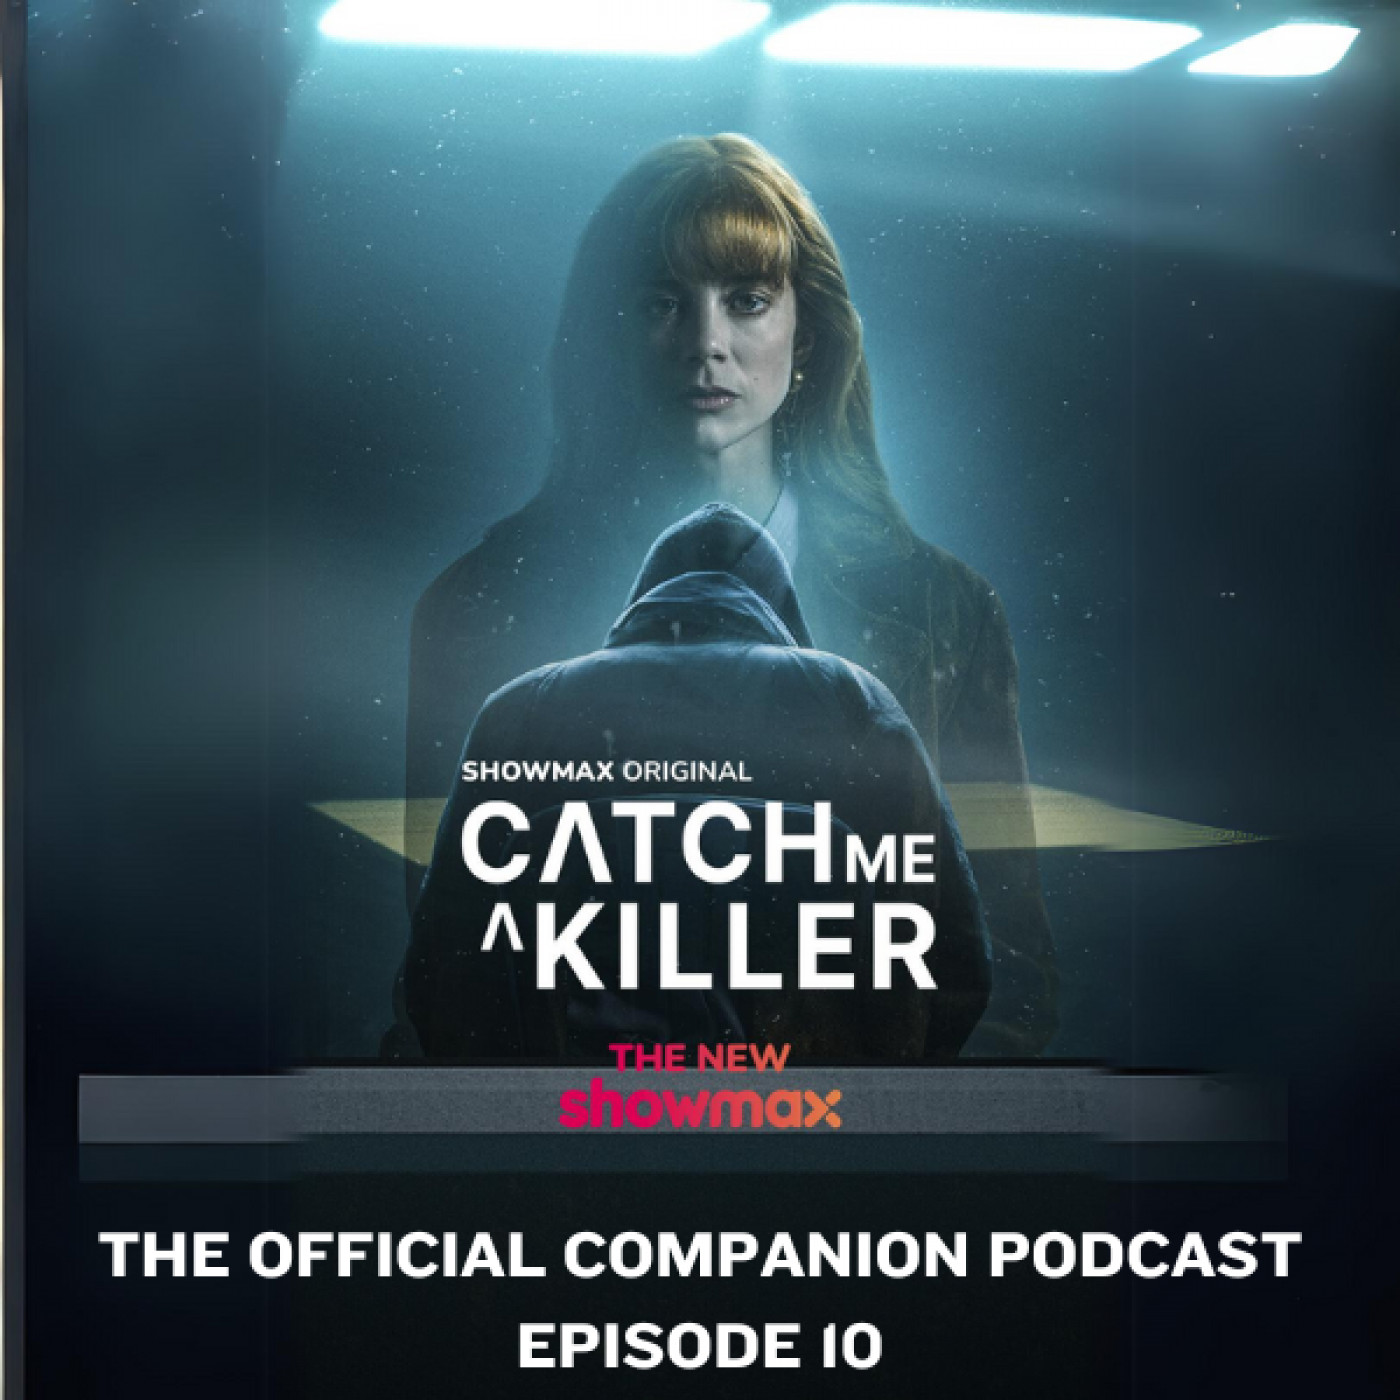 Catch Me A Killer: Official Companion Podcast Brought to you by Showmax (Episode 10)